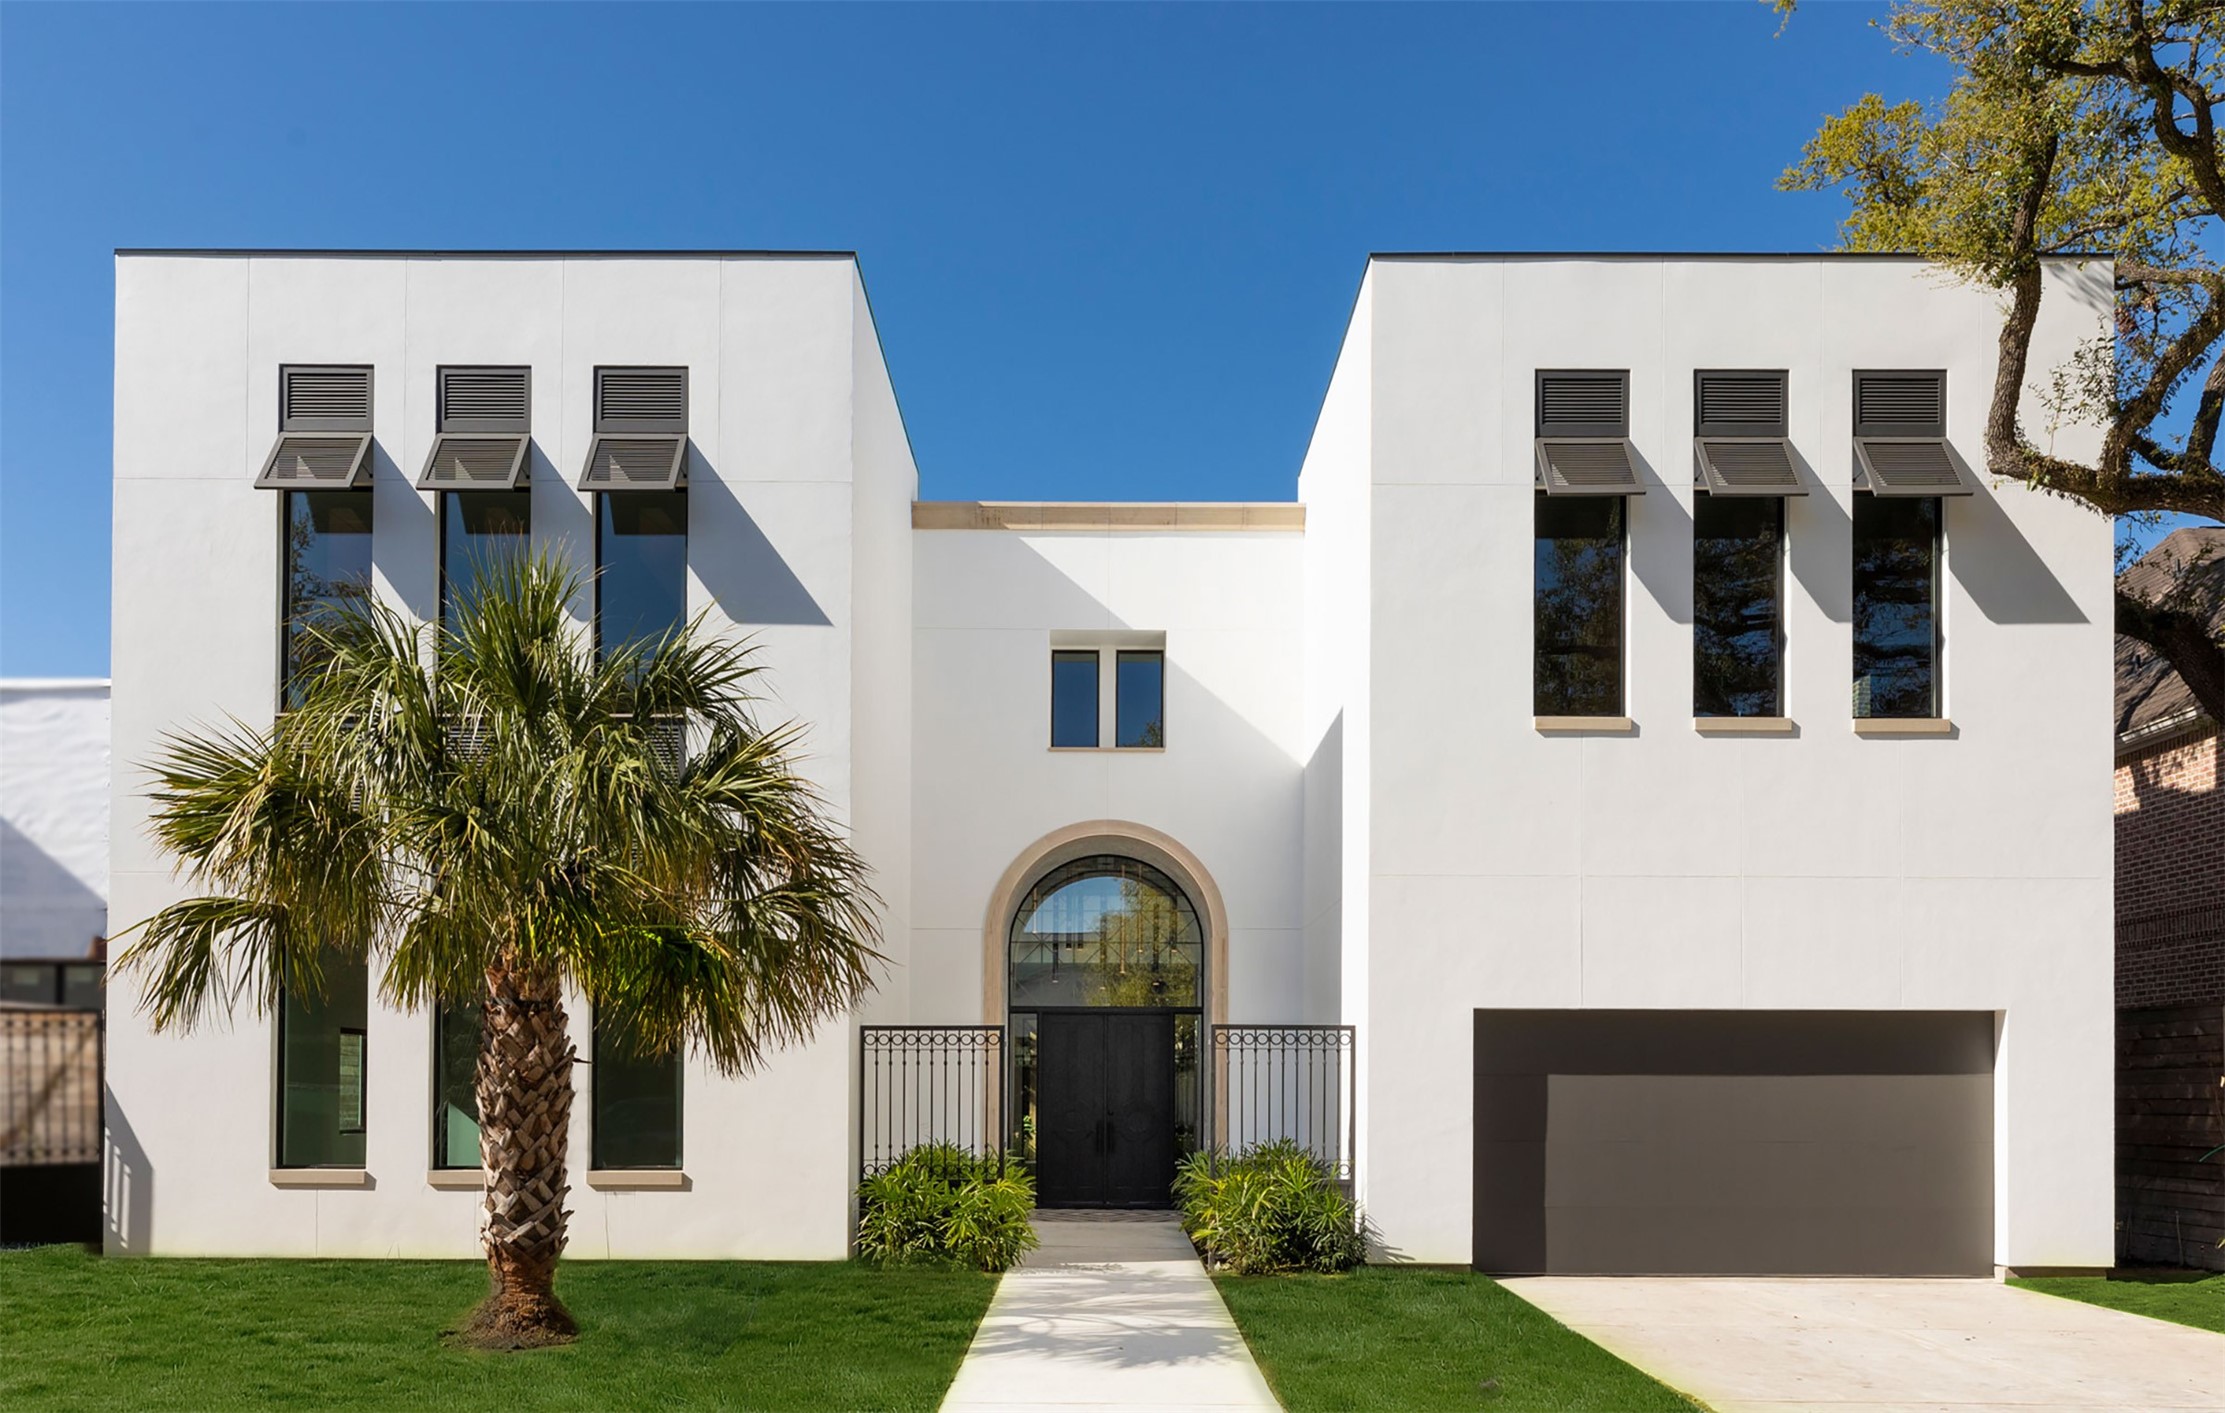 The House of Many Palms is on the 4000 block of Essex, a street known for contemporary architecture and its leafy canopy of mature Live Oaks.